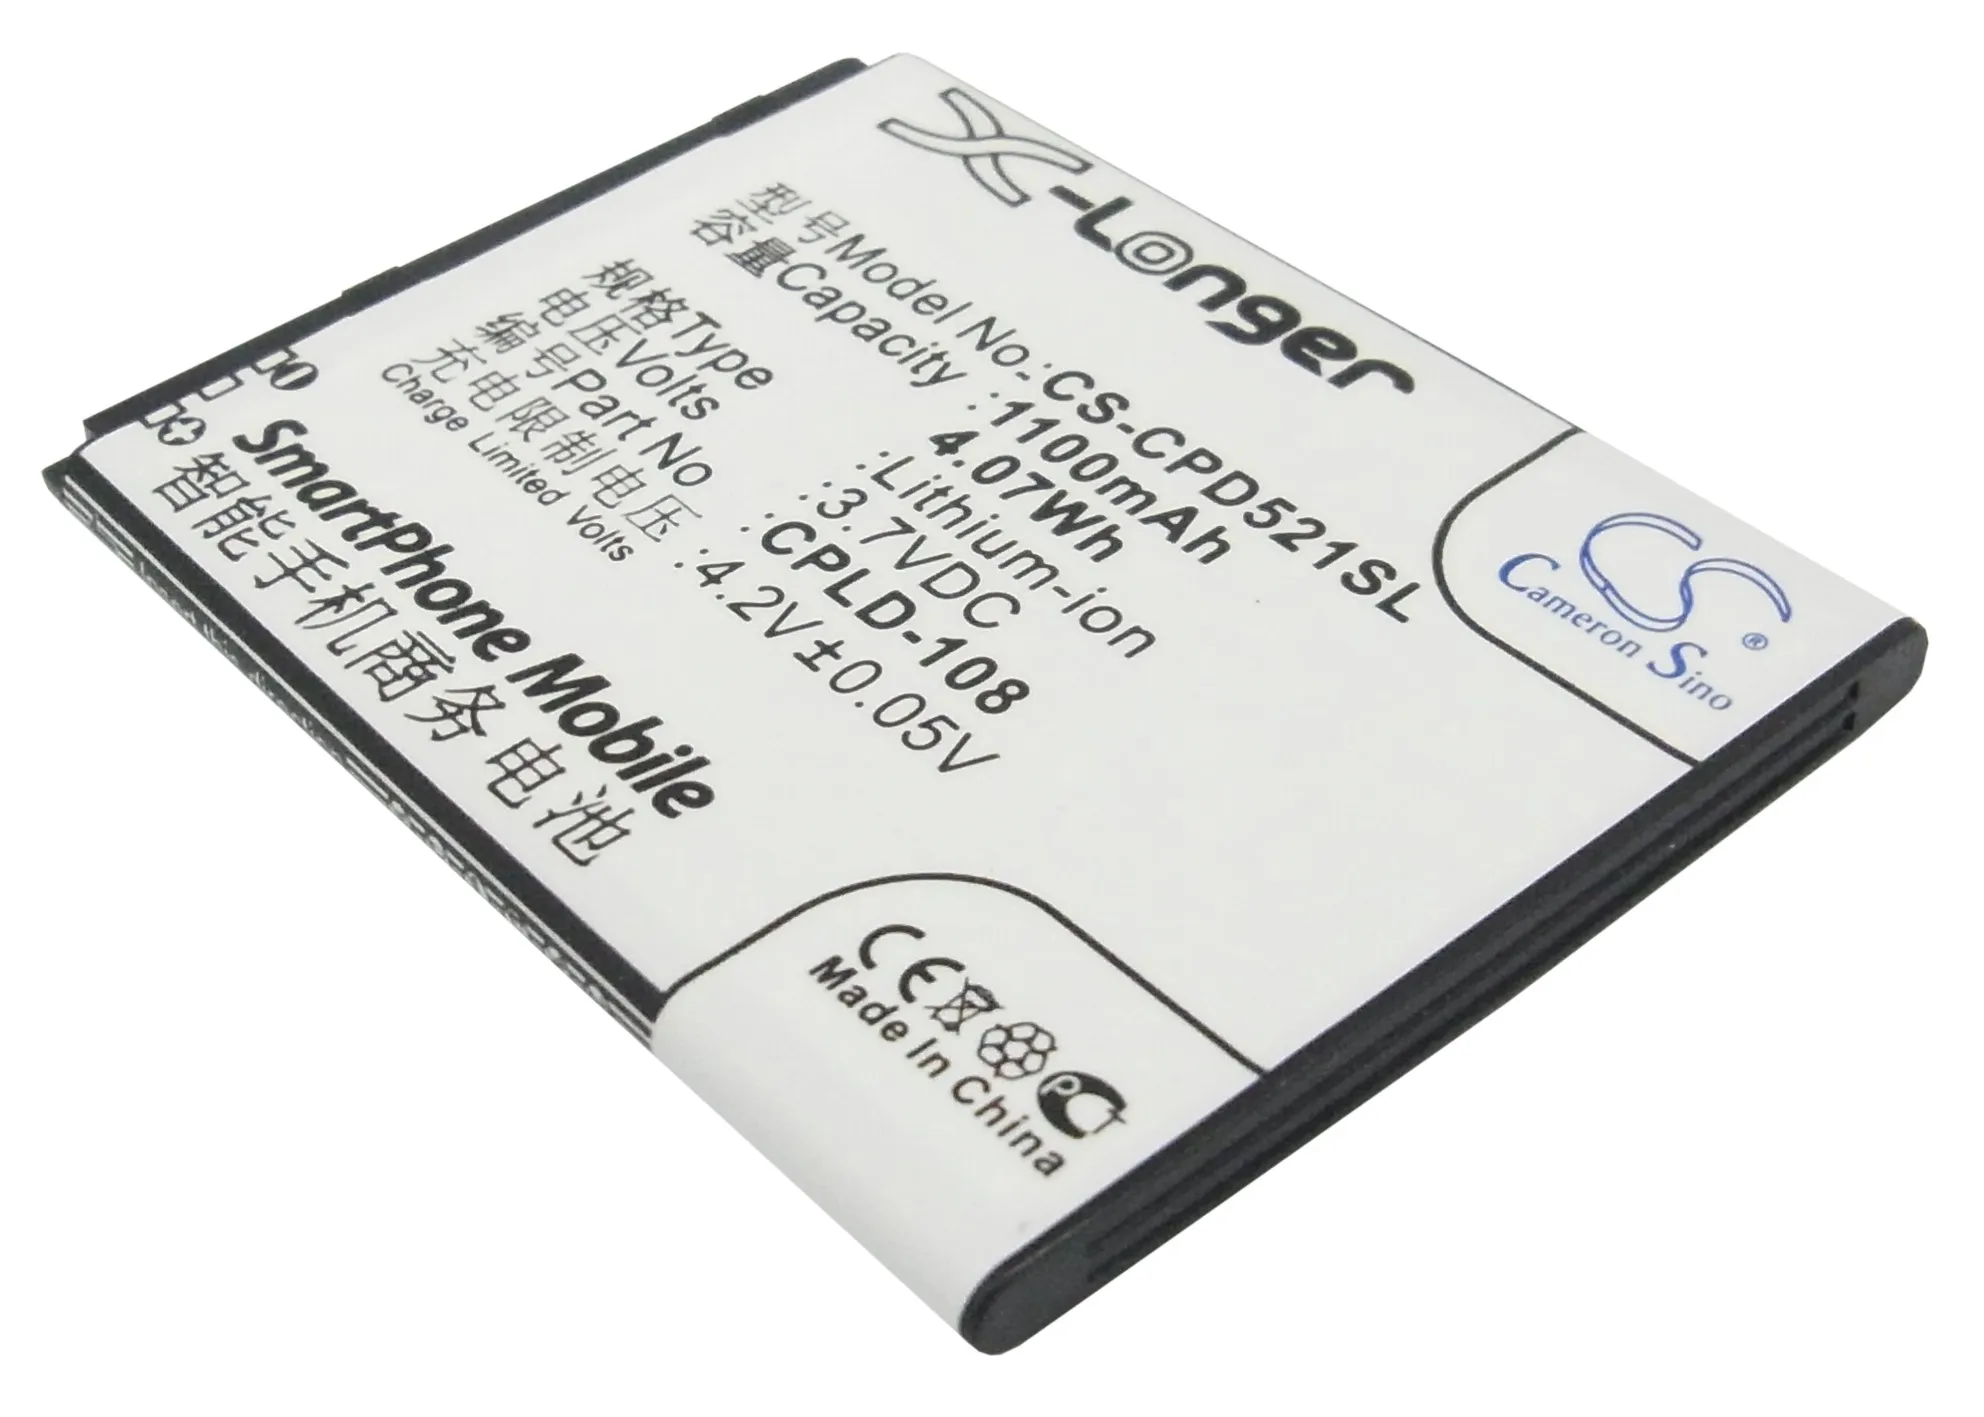 

CS 1100mAh / 4.07Wh battery for Coolpad 5210A, 5210D CPLD-108